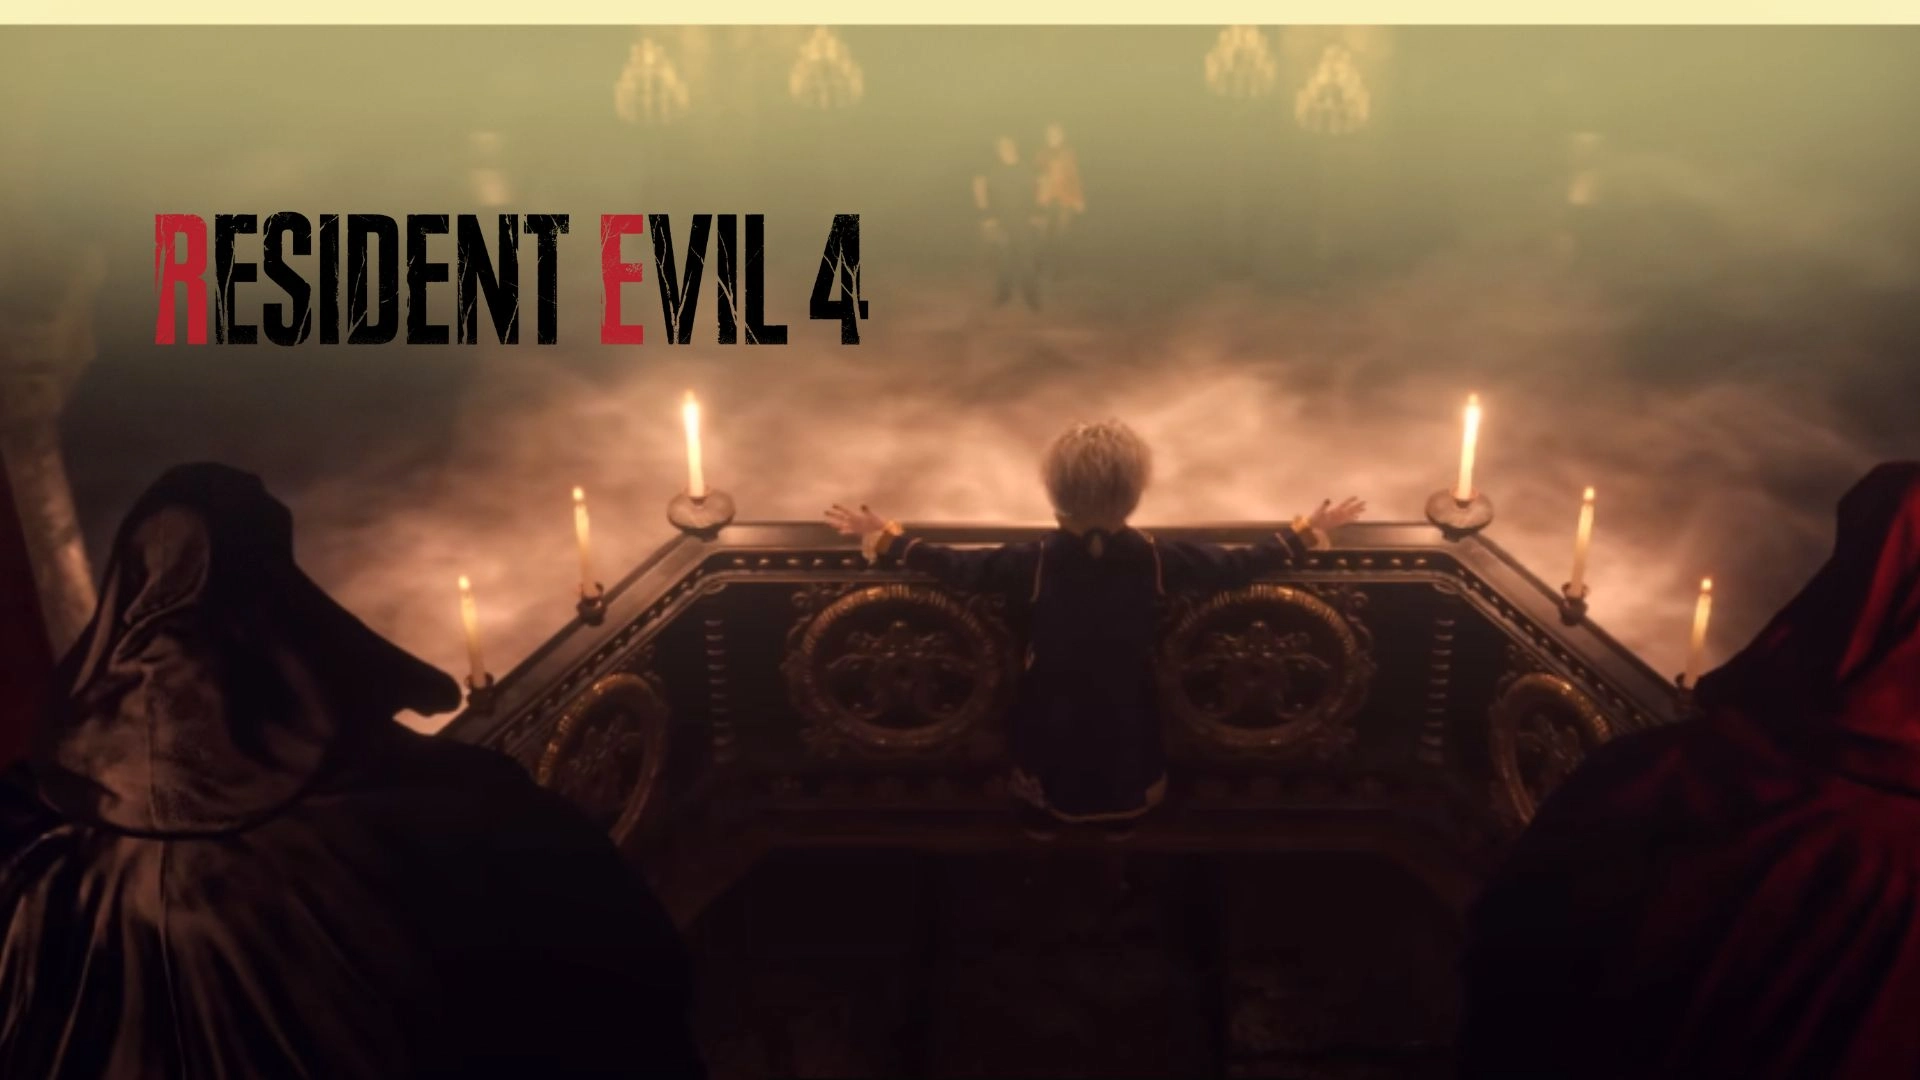 Resident Evil 4 Parents Guide and Age Rating (2022)